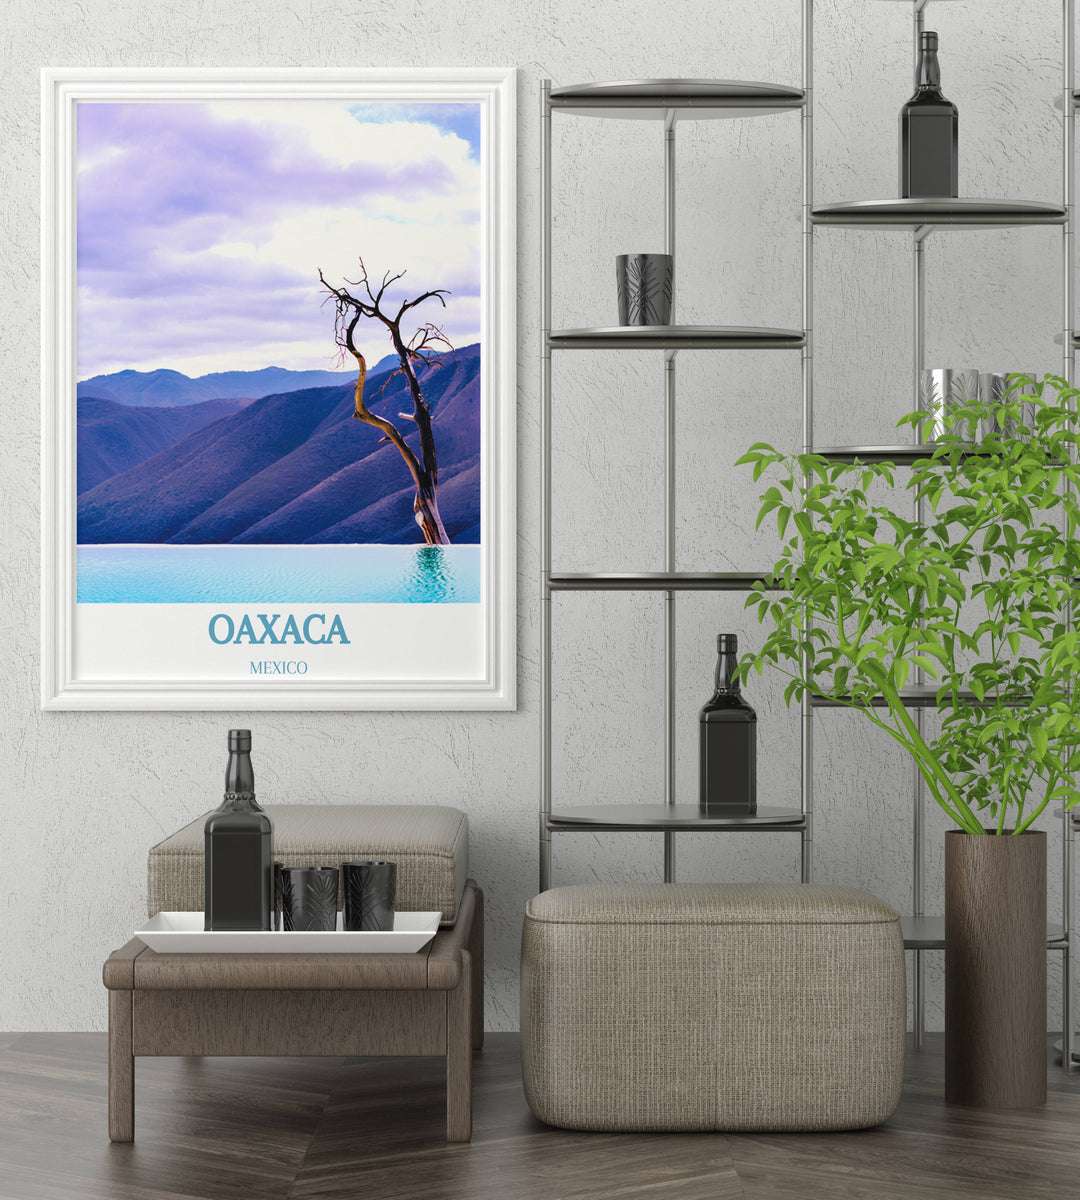 Artistic representation of Hierve el Agua in Oaxaca, a perfect gift for lovers of natural beauty and Mexican landscapes.